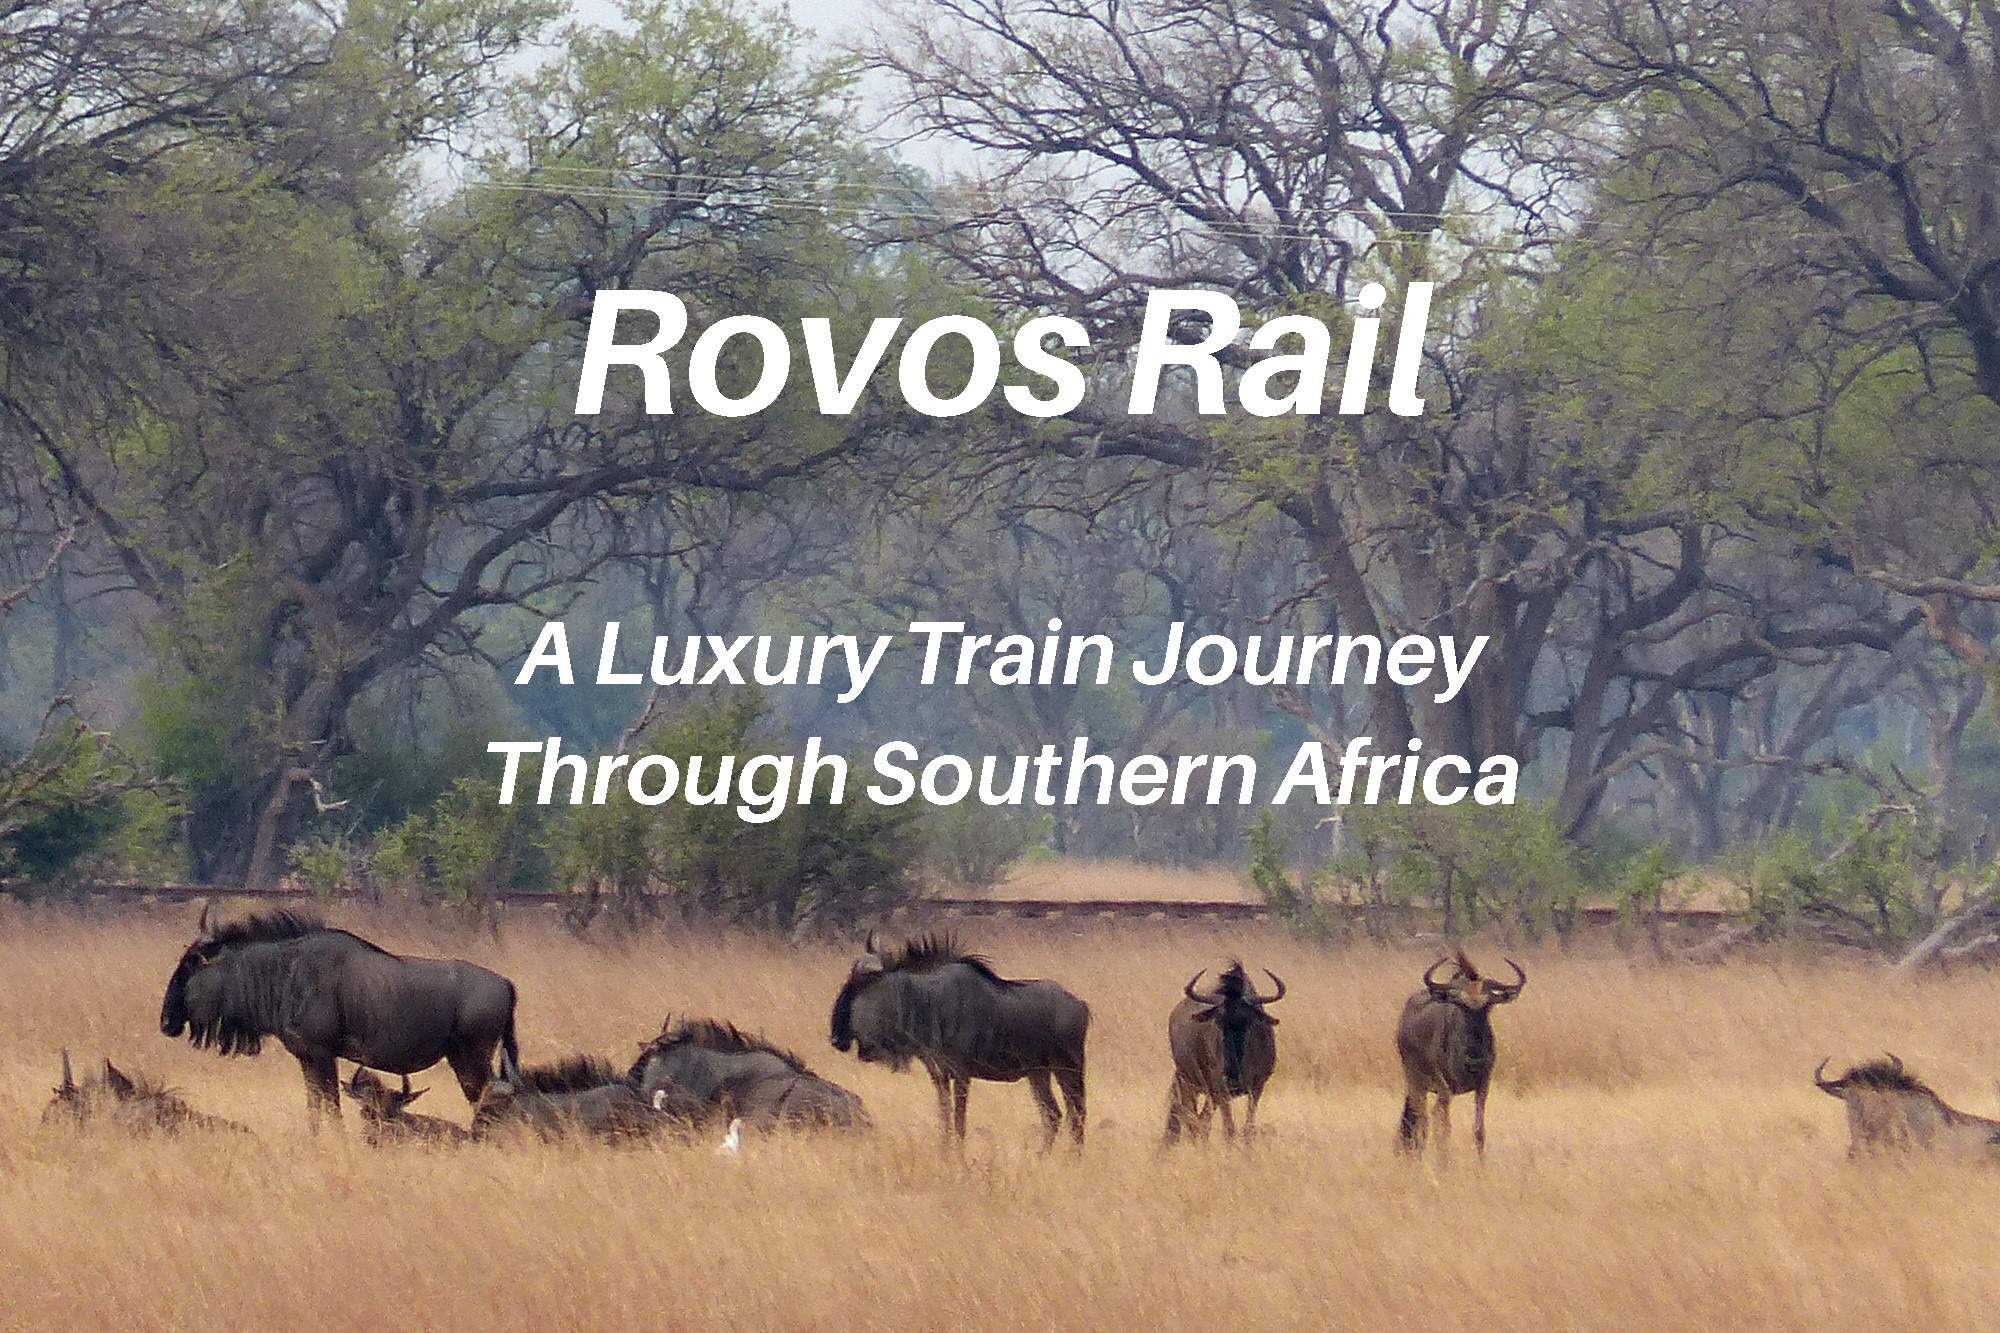 Wildebeests near the train in Zimbabwe, Rovos Rail review.